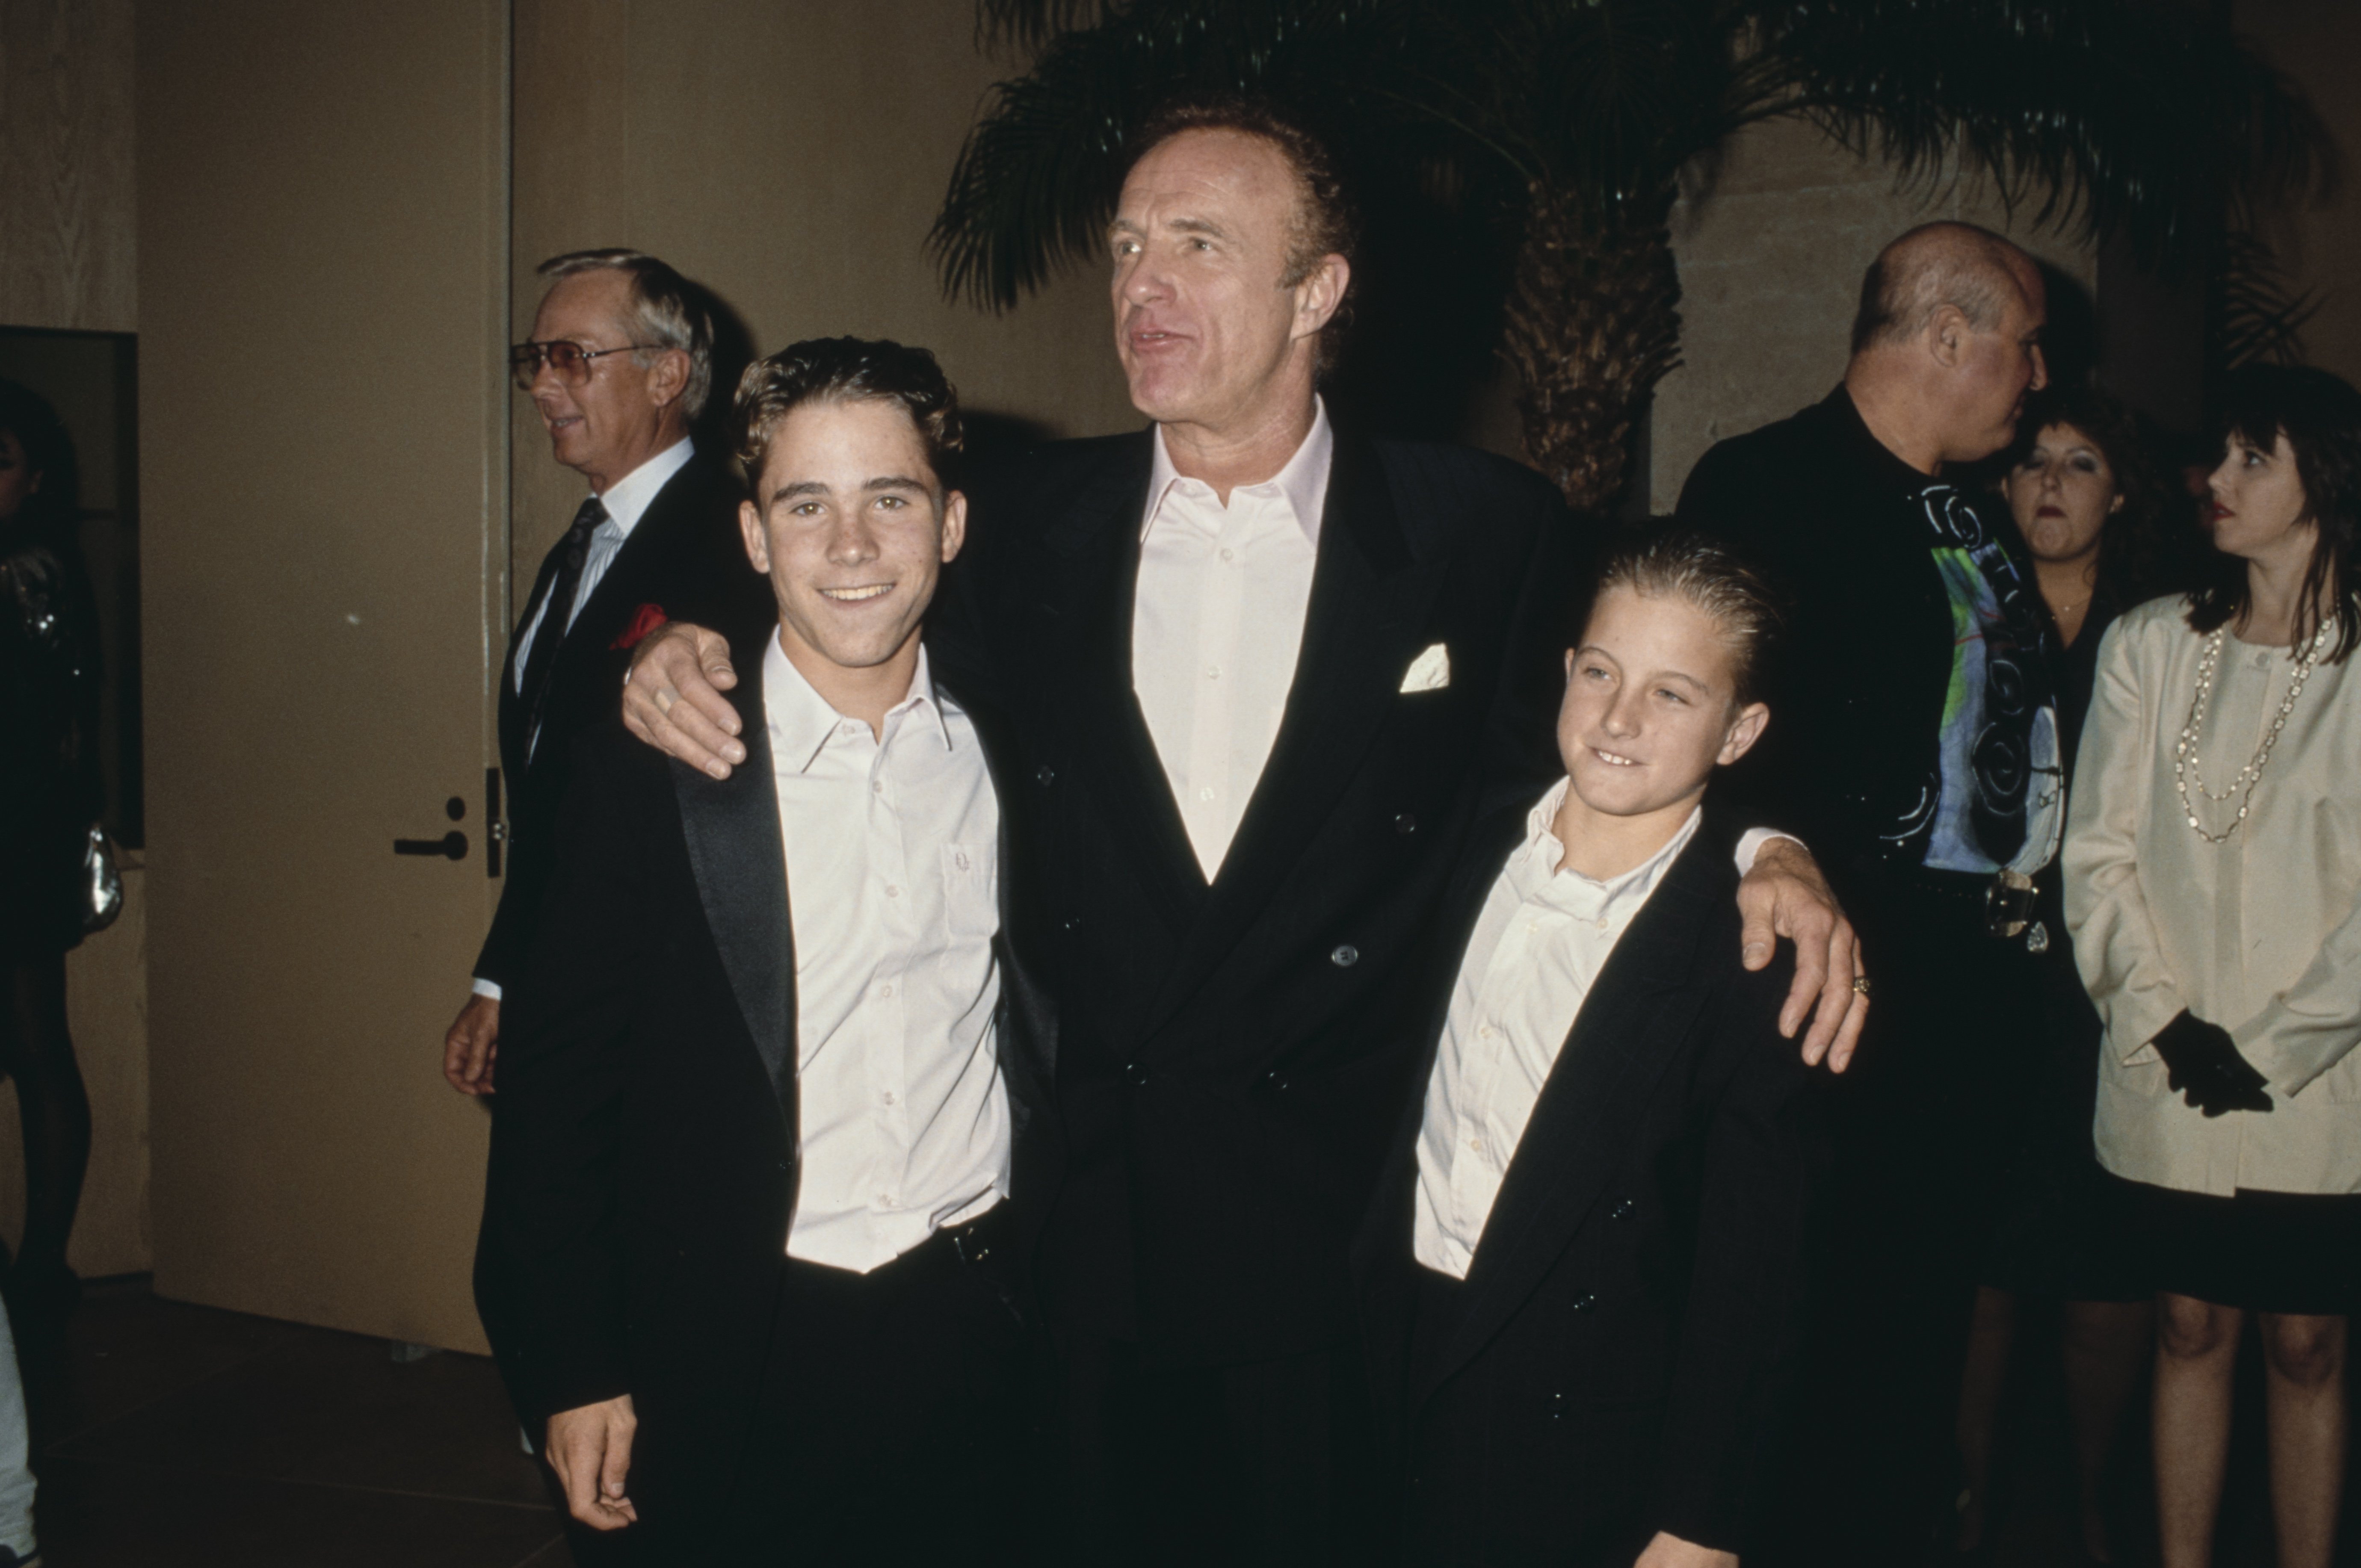 James Caan pictured with Scott Caan and relative during the premiere of "Misery" at Mann Village Theater on November 29, 1990 in Westwood, California. / Source: Getty Images